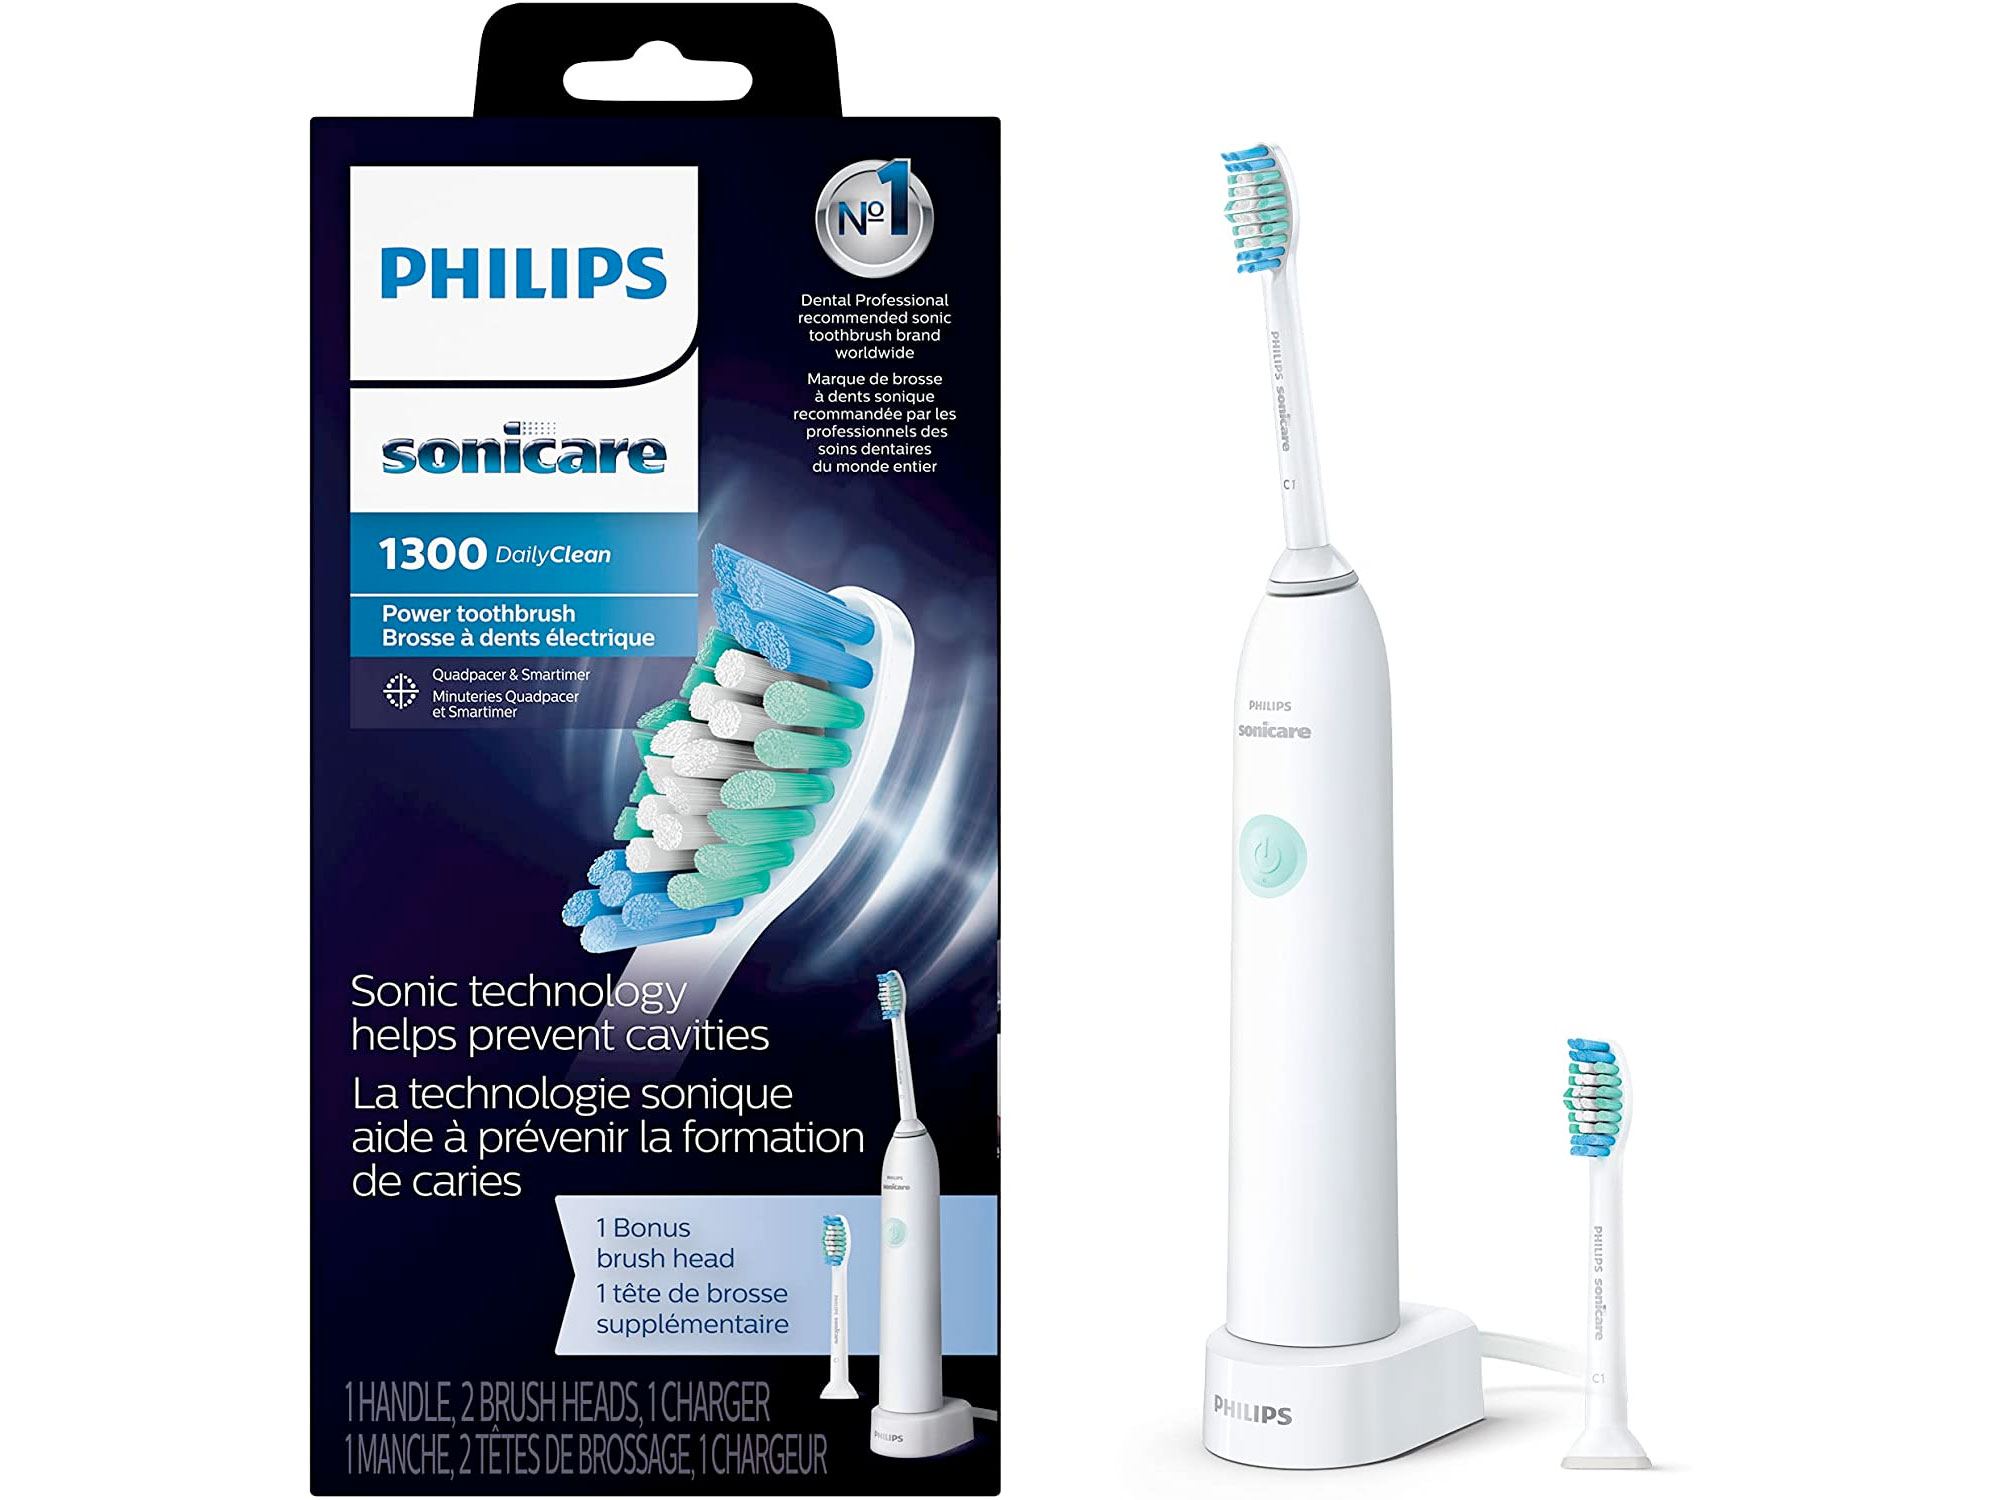 Amazon：Philips Sonicare DailyClean 1300 Rechargeable Electric Toothbrush只卖$24.99